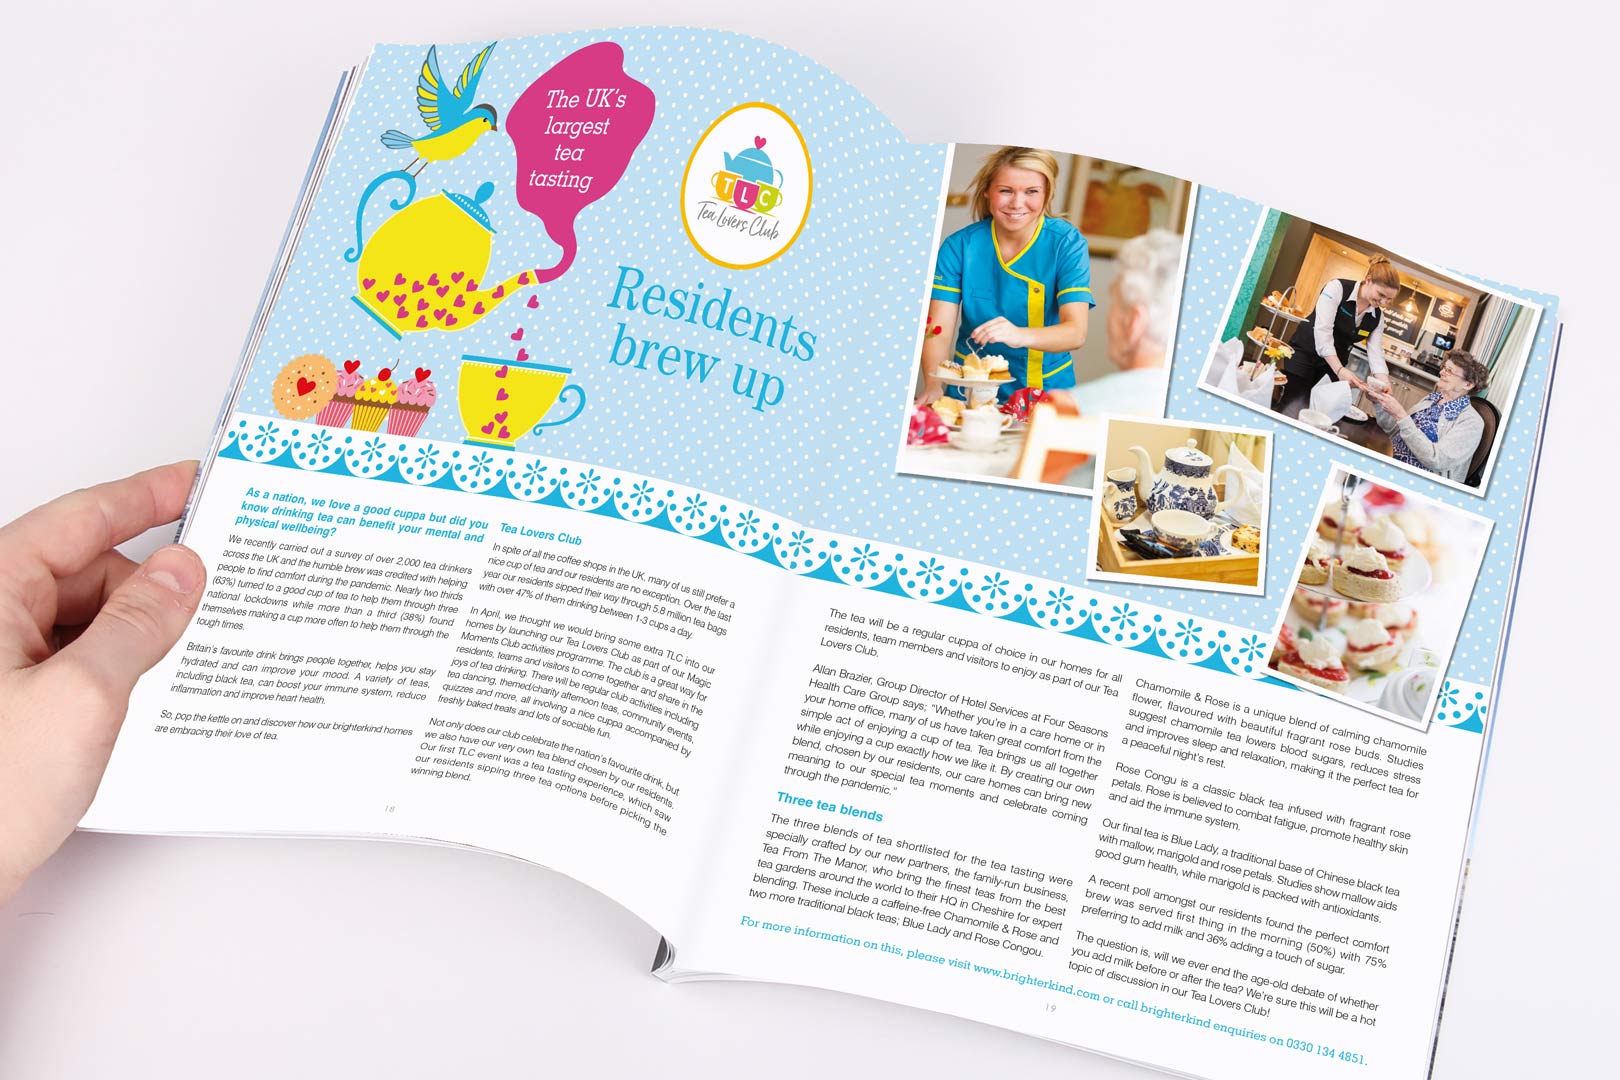 brighterkind magazine article Residents brew up